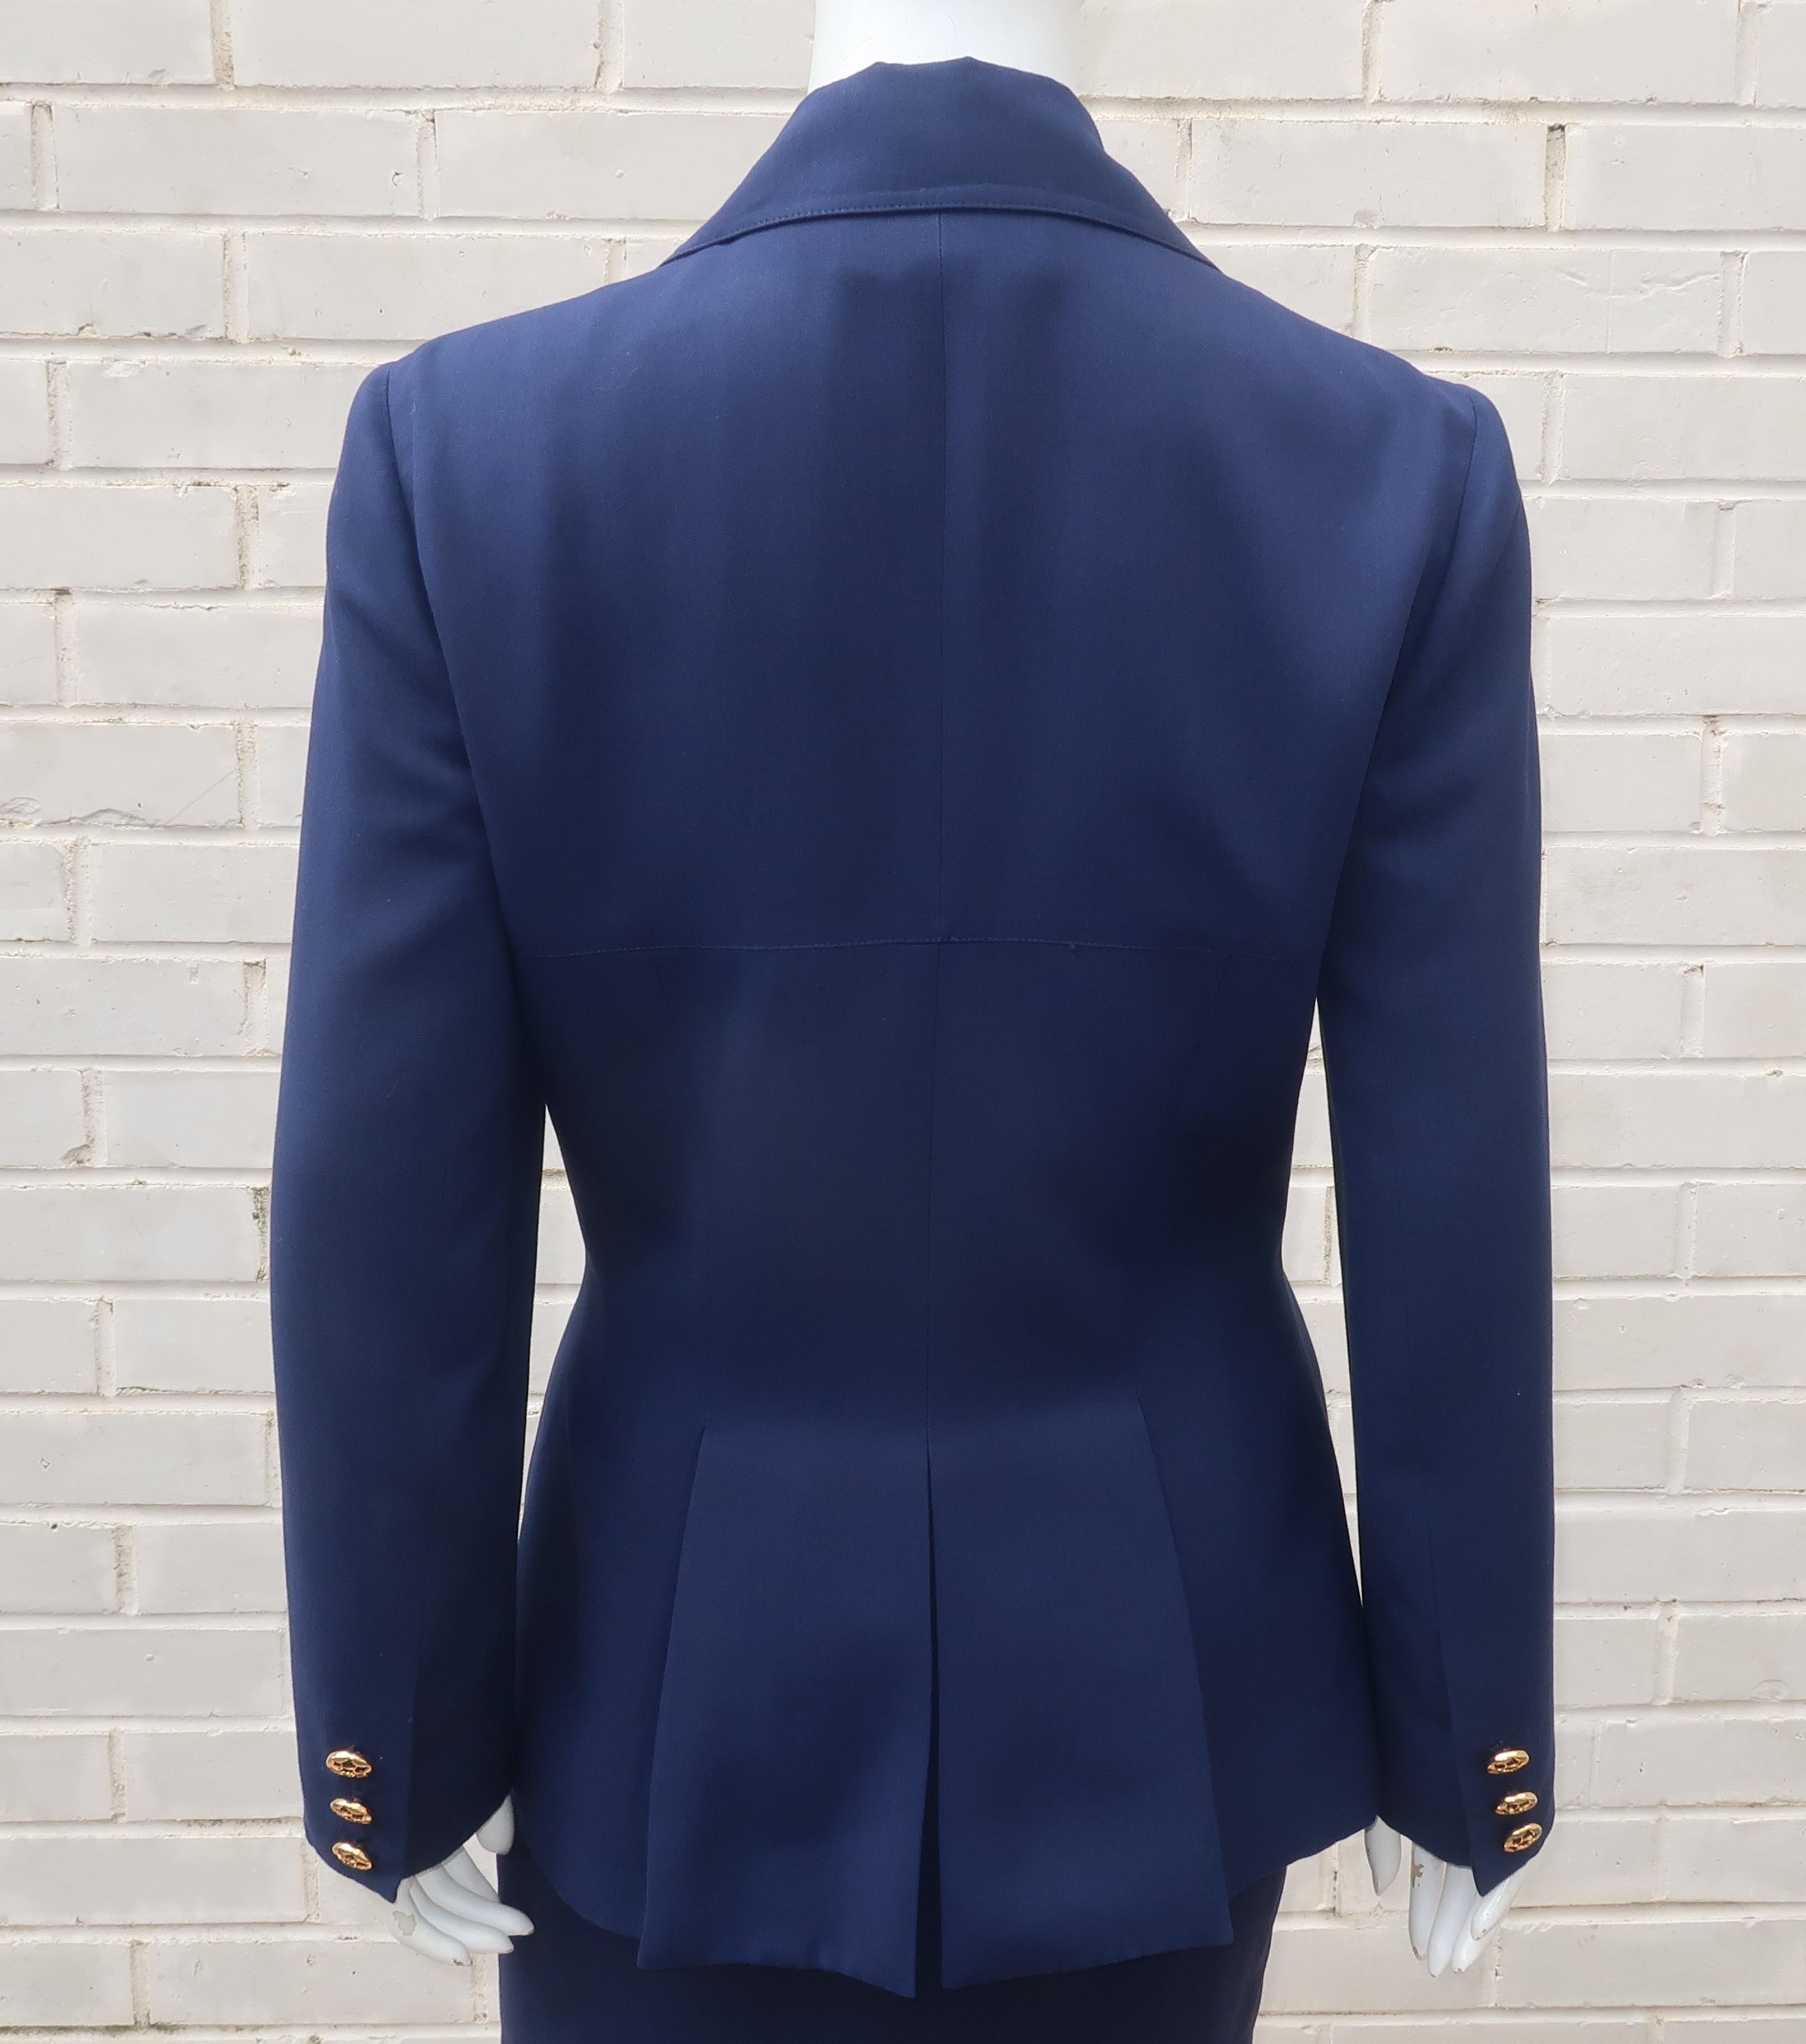 Karl Lagerfeld Navy Blue Skirt Suit With Gold Buttons 1